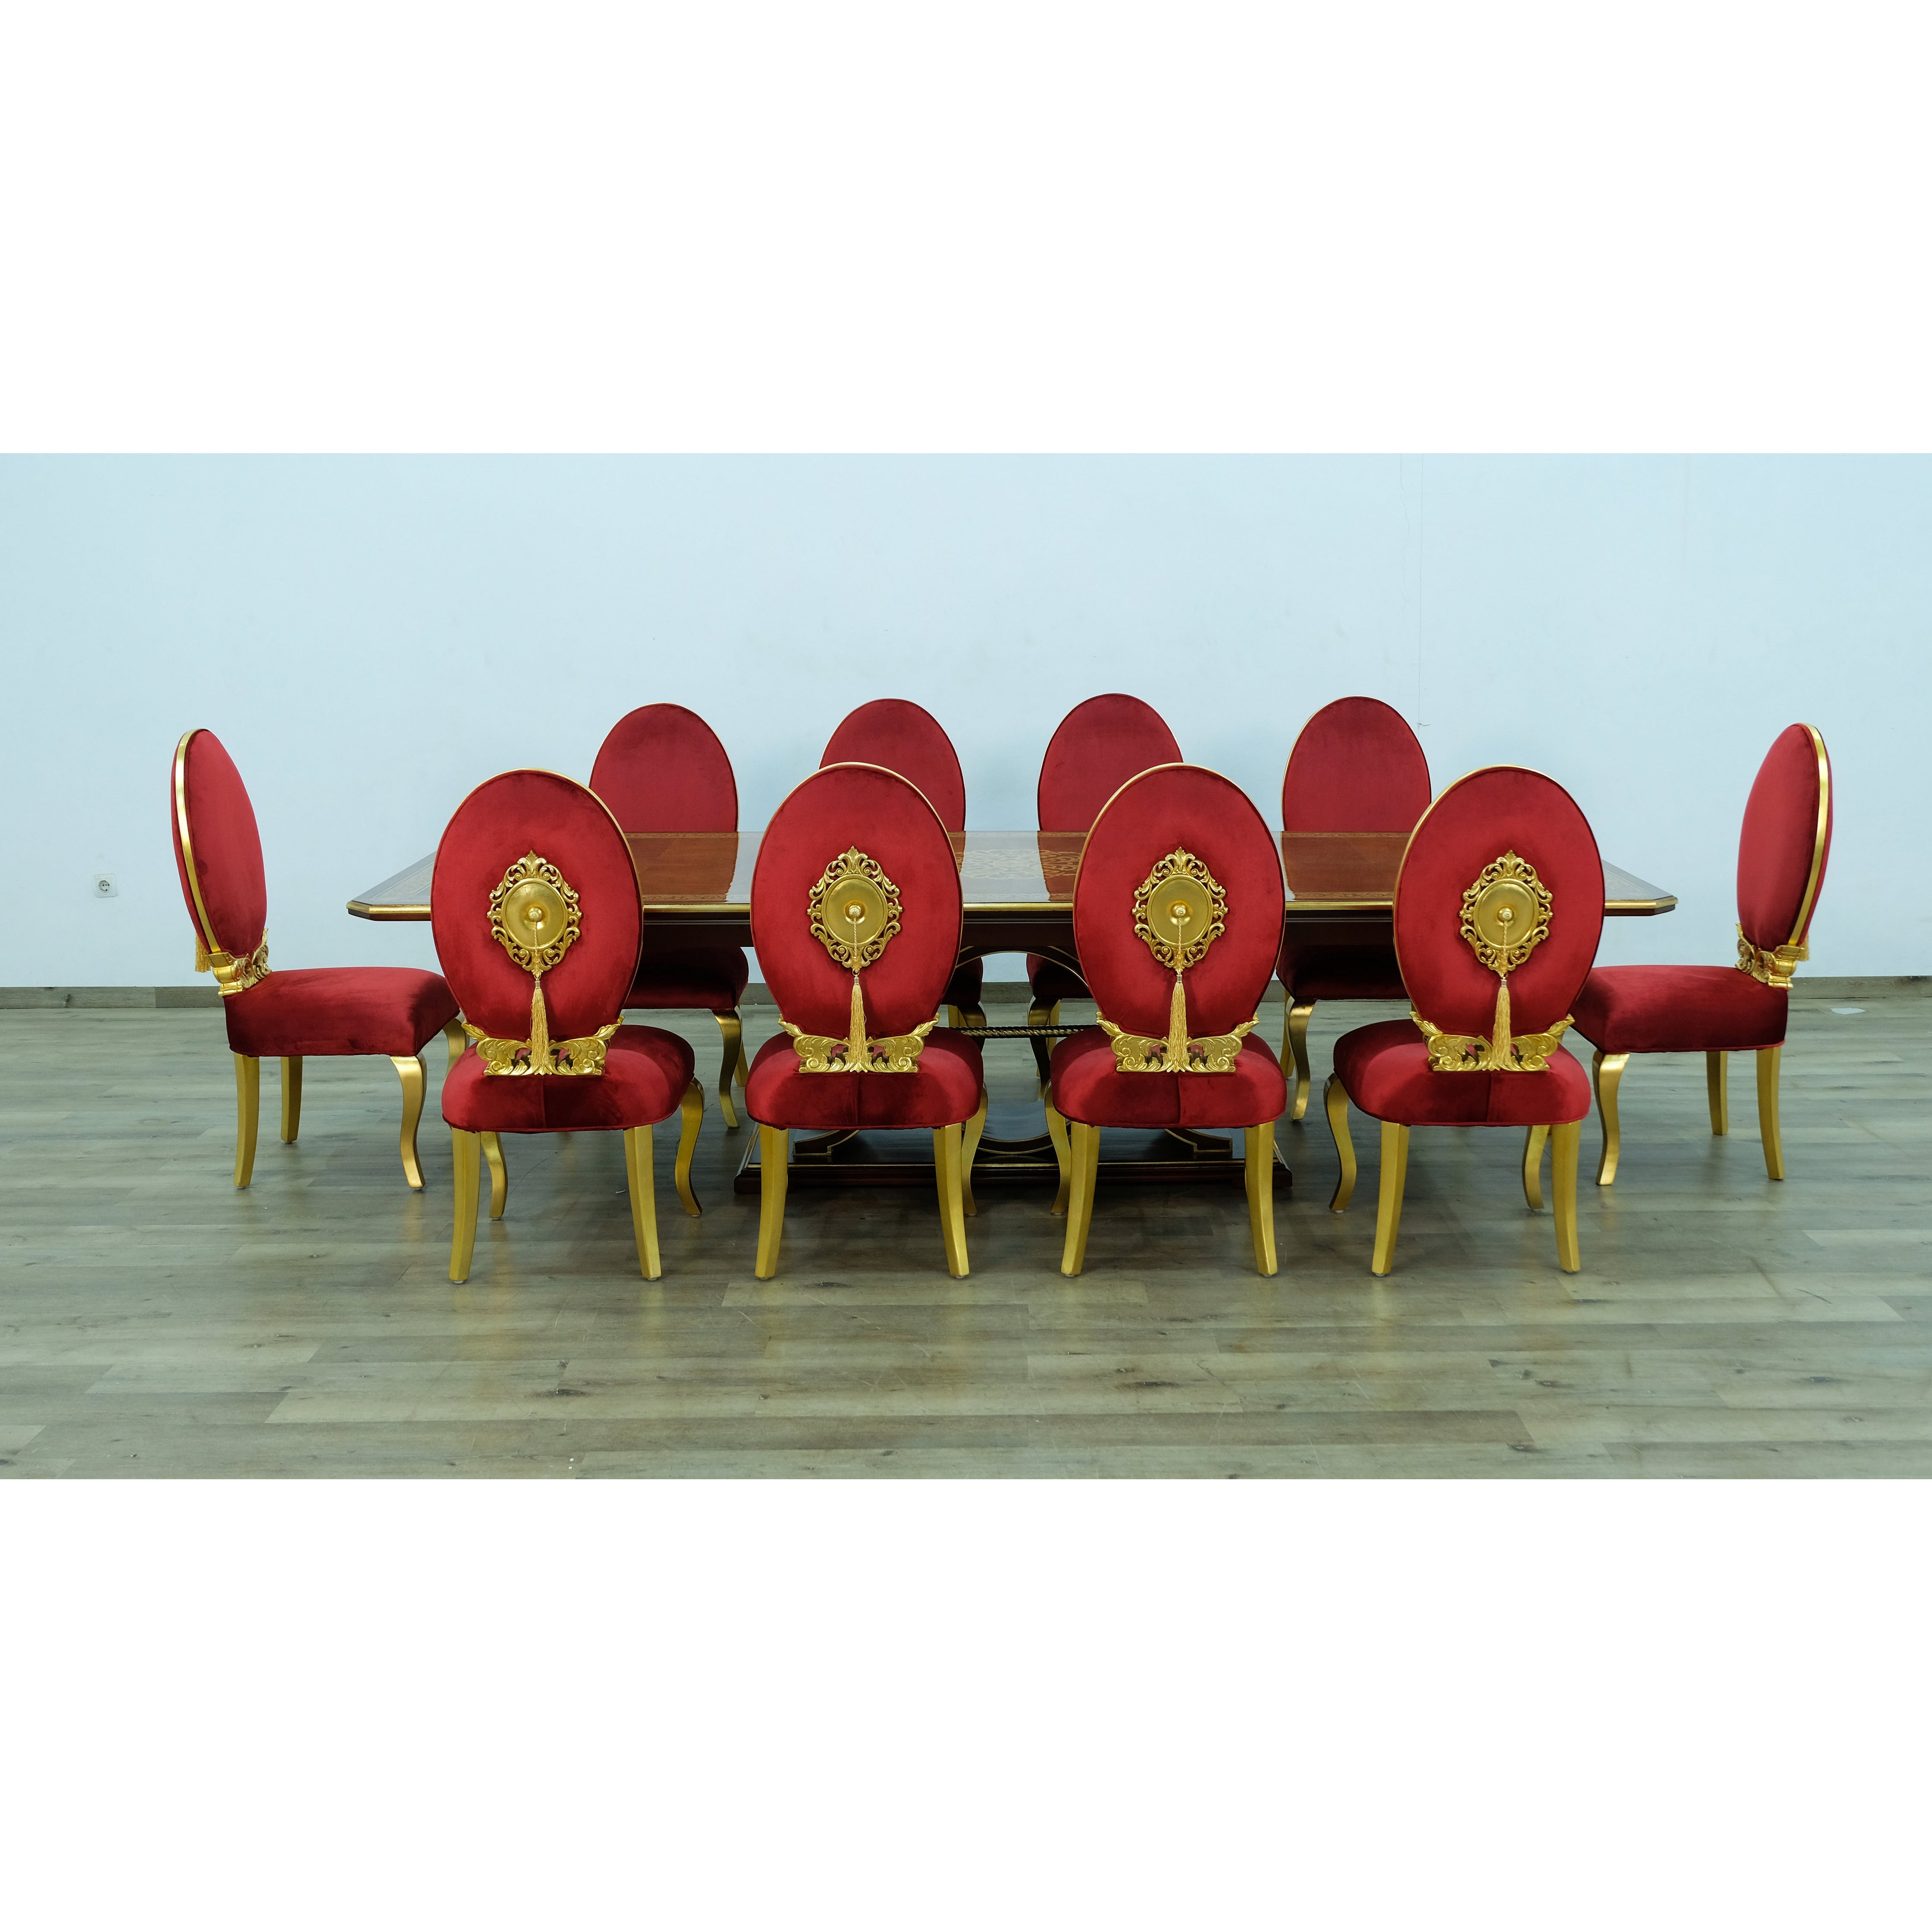 European Furniture - Rosella 11 Piece Dining Room Set in Havana With Deco Gold Leaf - 44697-11SET - New Star Living